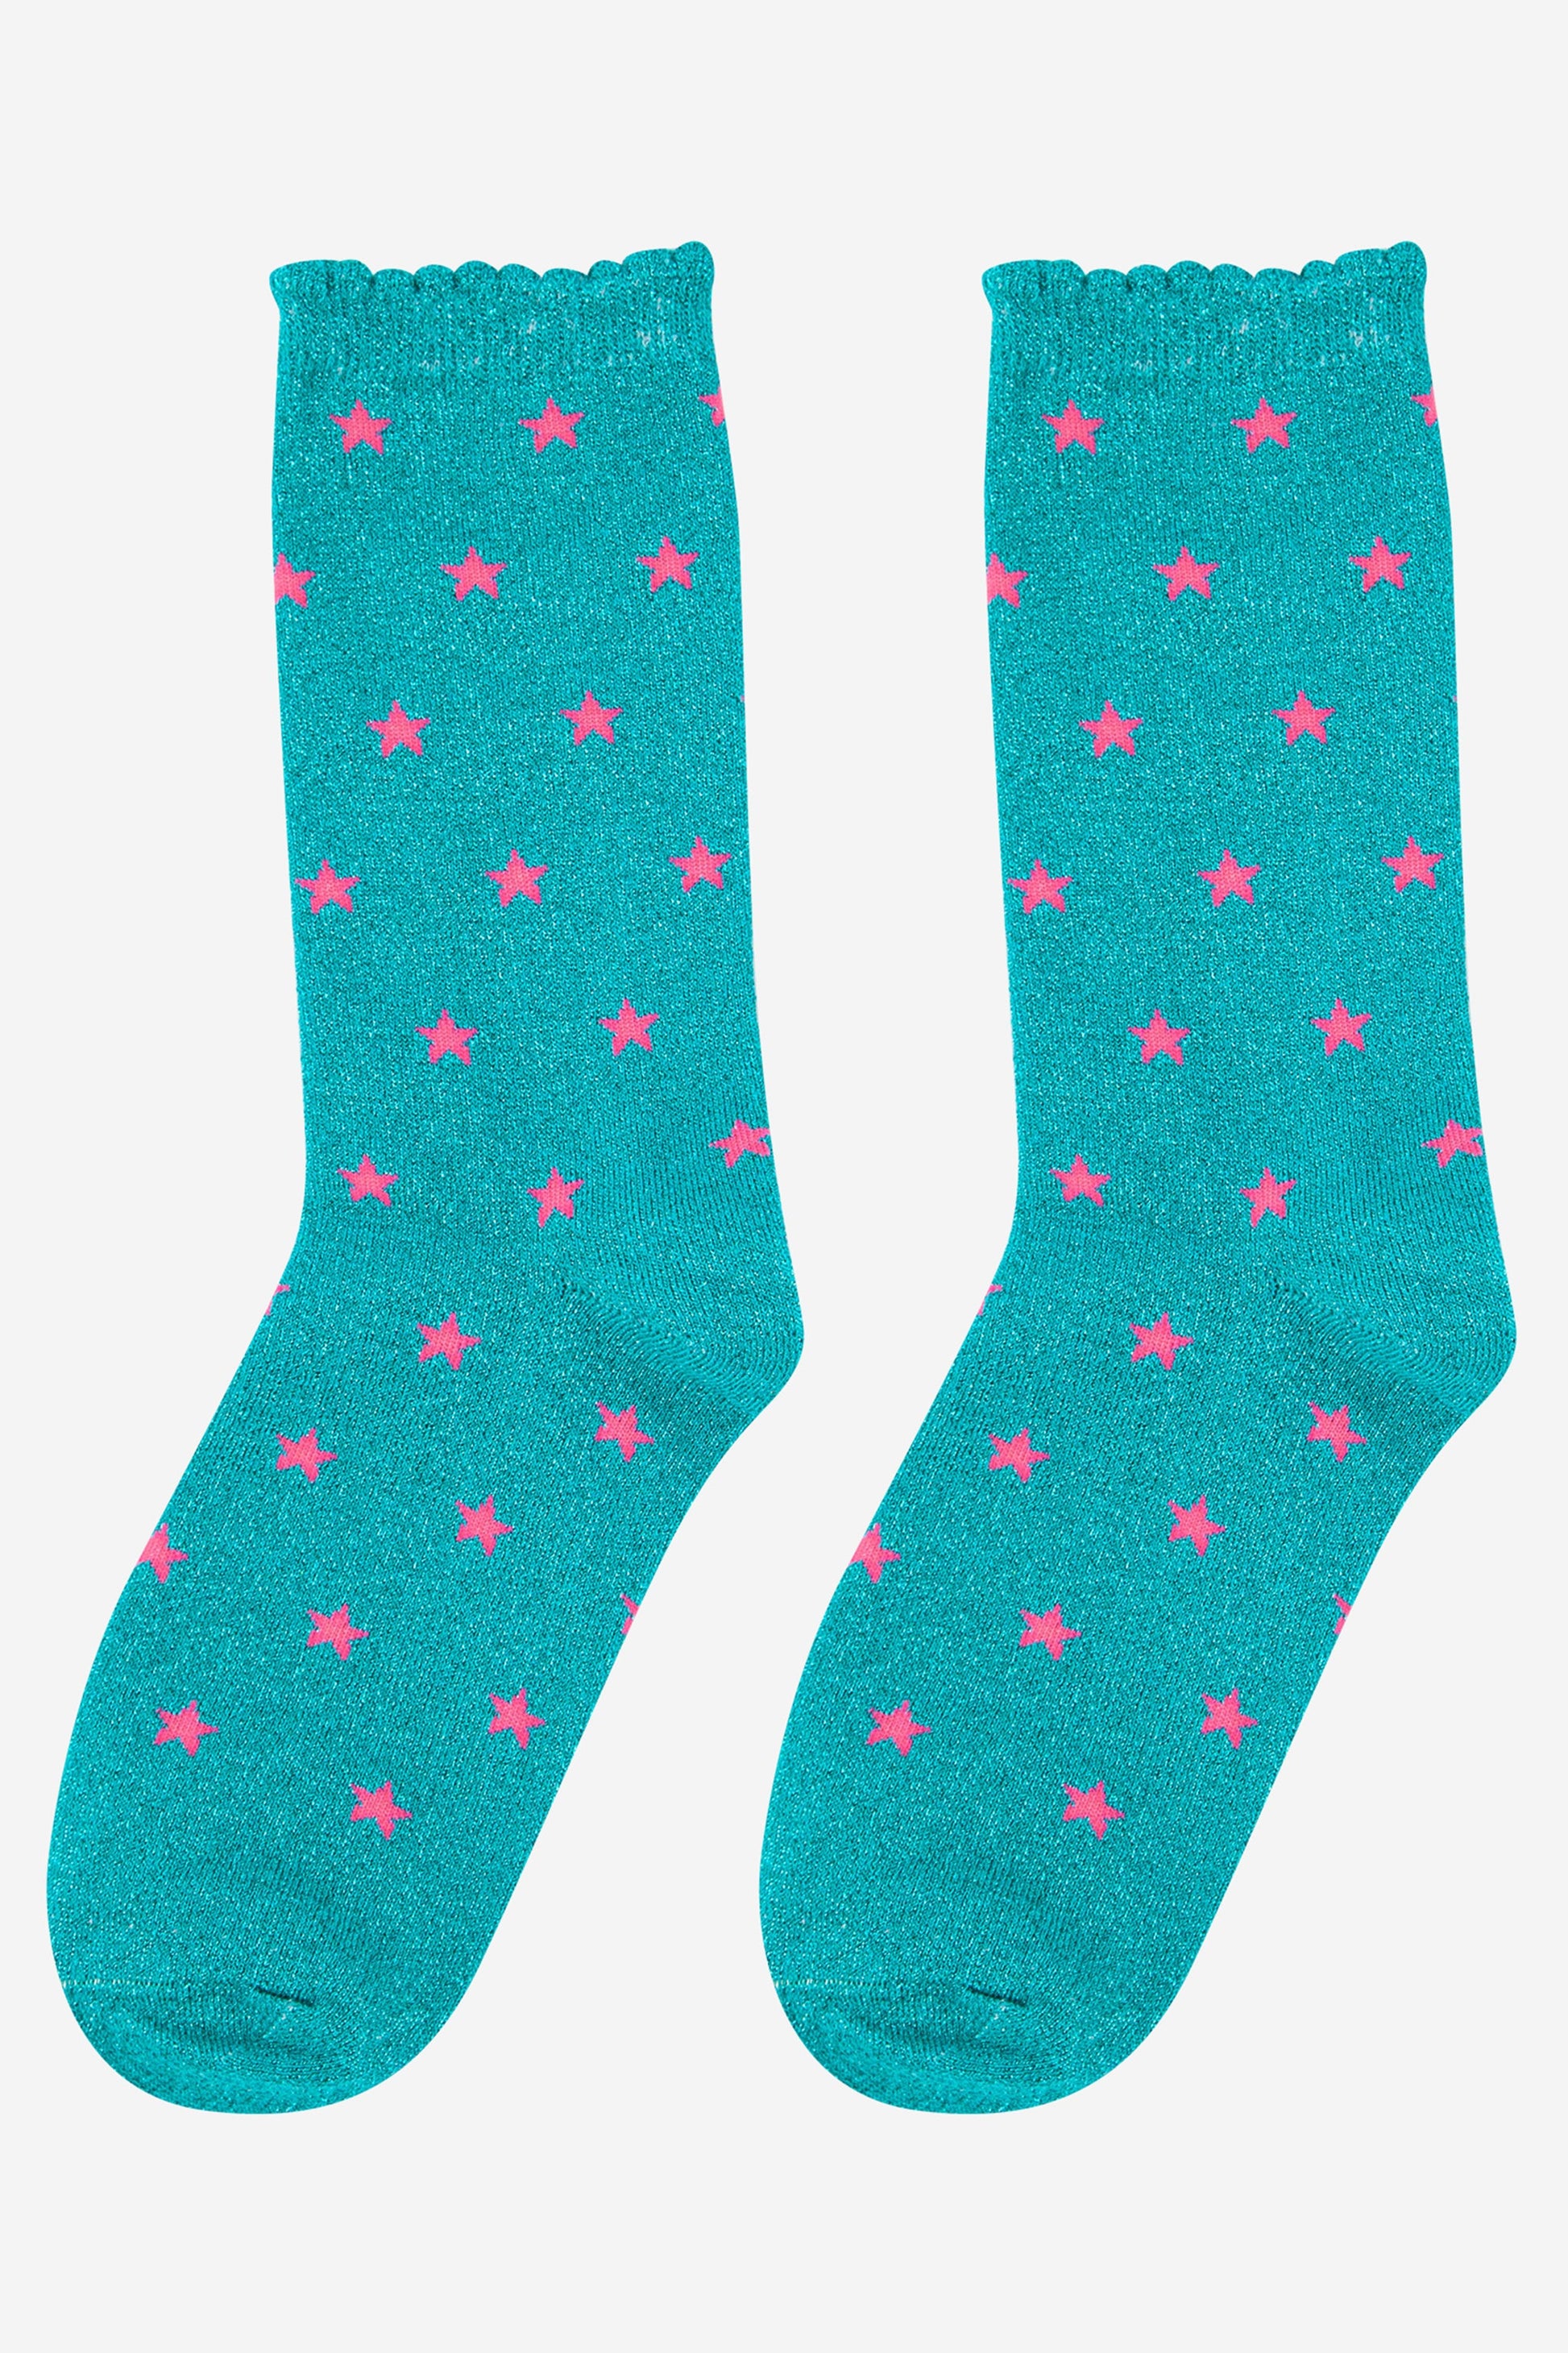 blue glitter ankle socks with scalloped edges and an all over pink star pattern